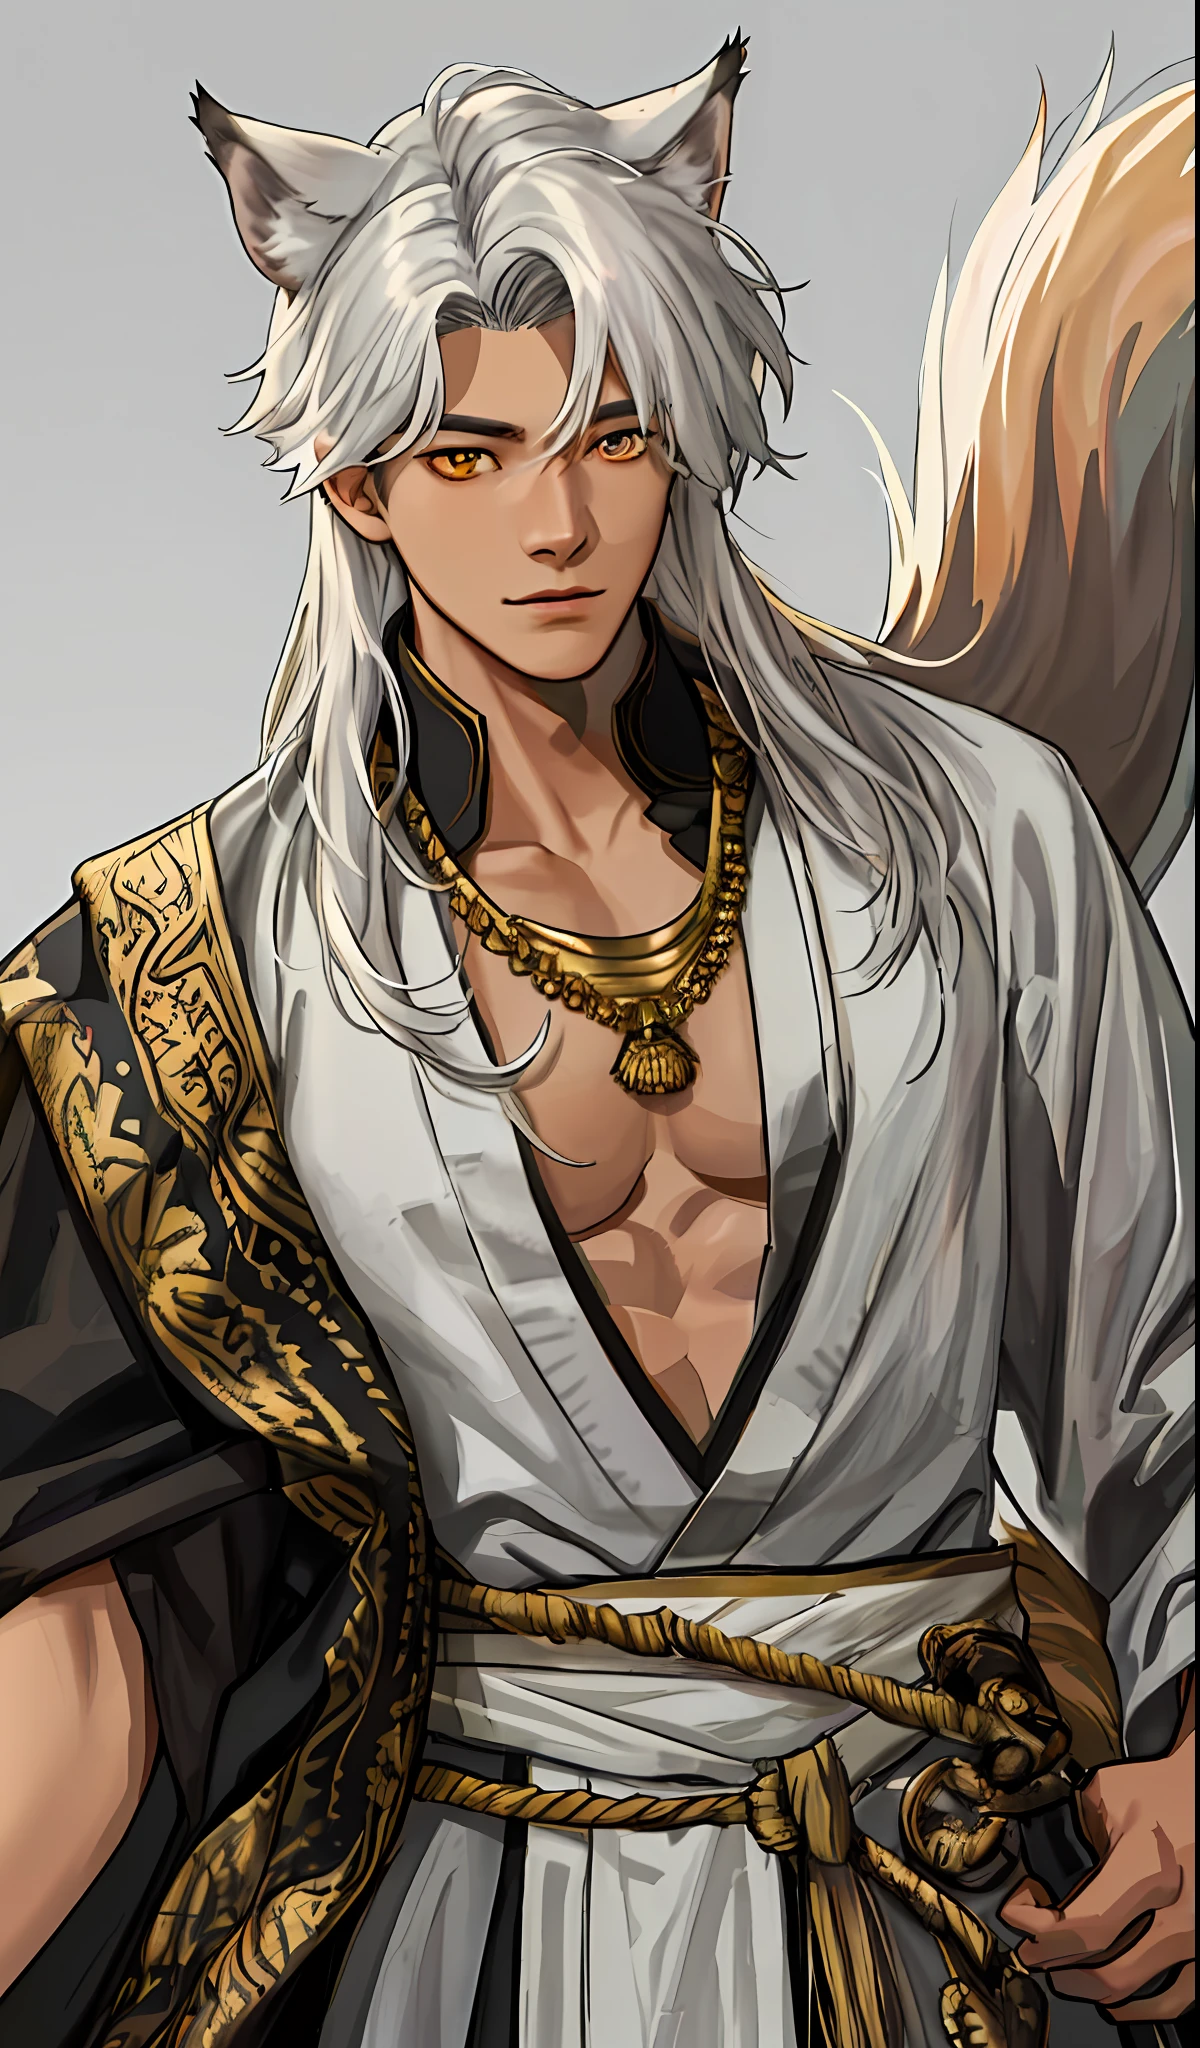 An incredibly detailed portrait of a handsome asian boy with dark skin, wolf ears and tail, golden eyes, and long white messy hair arranged over one eye, wearing only a loincloth. The focus should be on his extremely detailed face, which should be breathtakingly realistic and capture every nuance of his expression. realistic, who is only shirtless, close up to his face, portrait of himself.